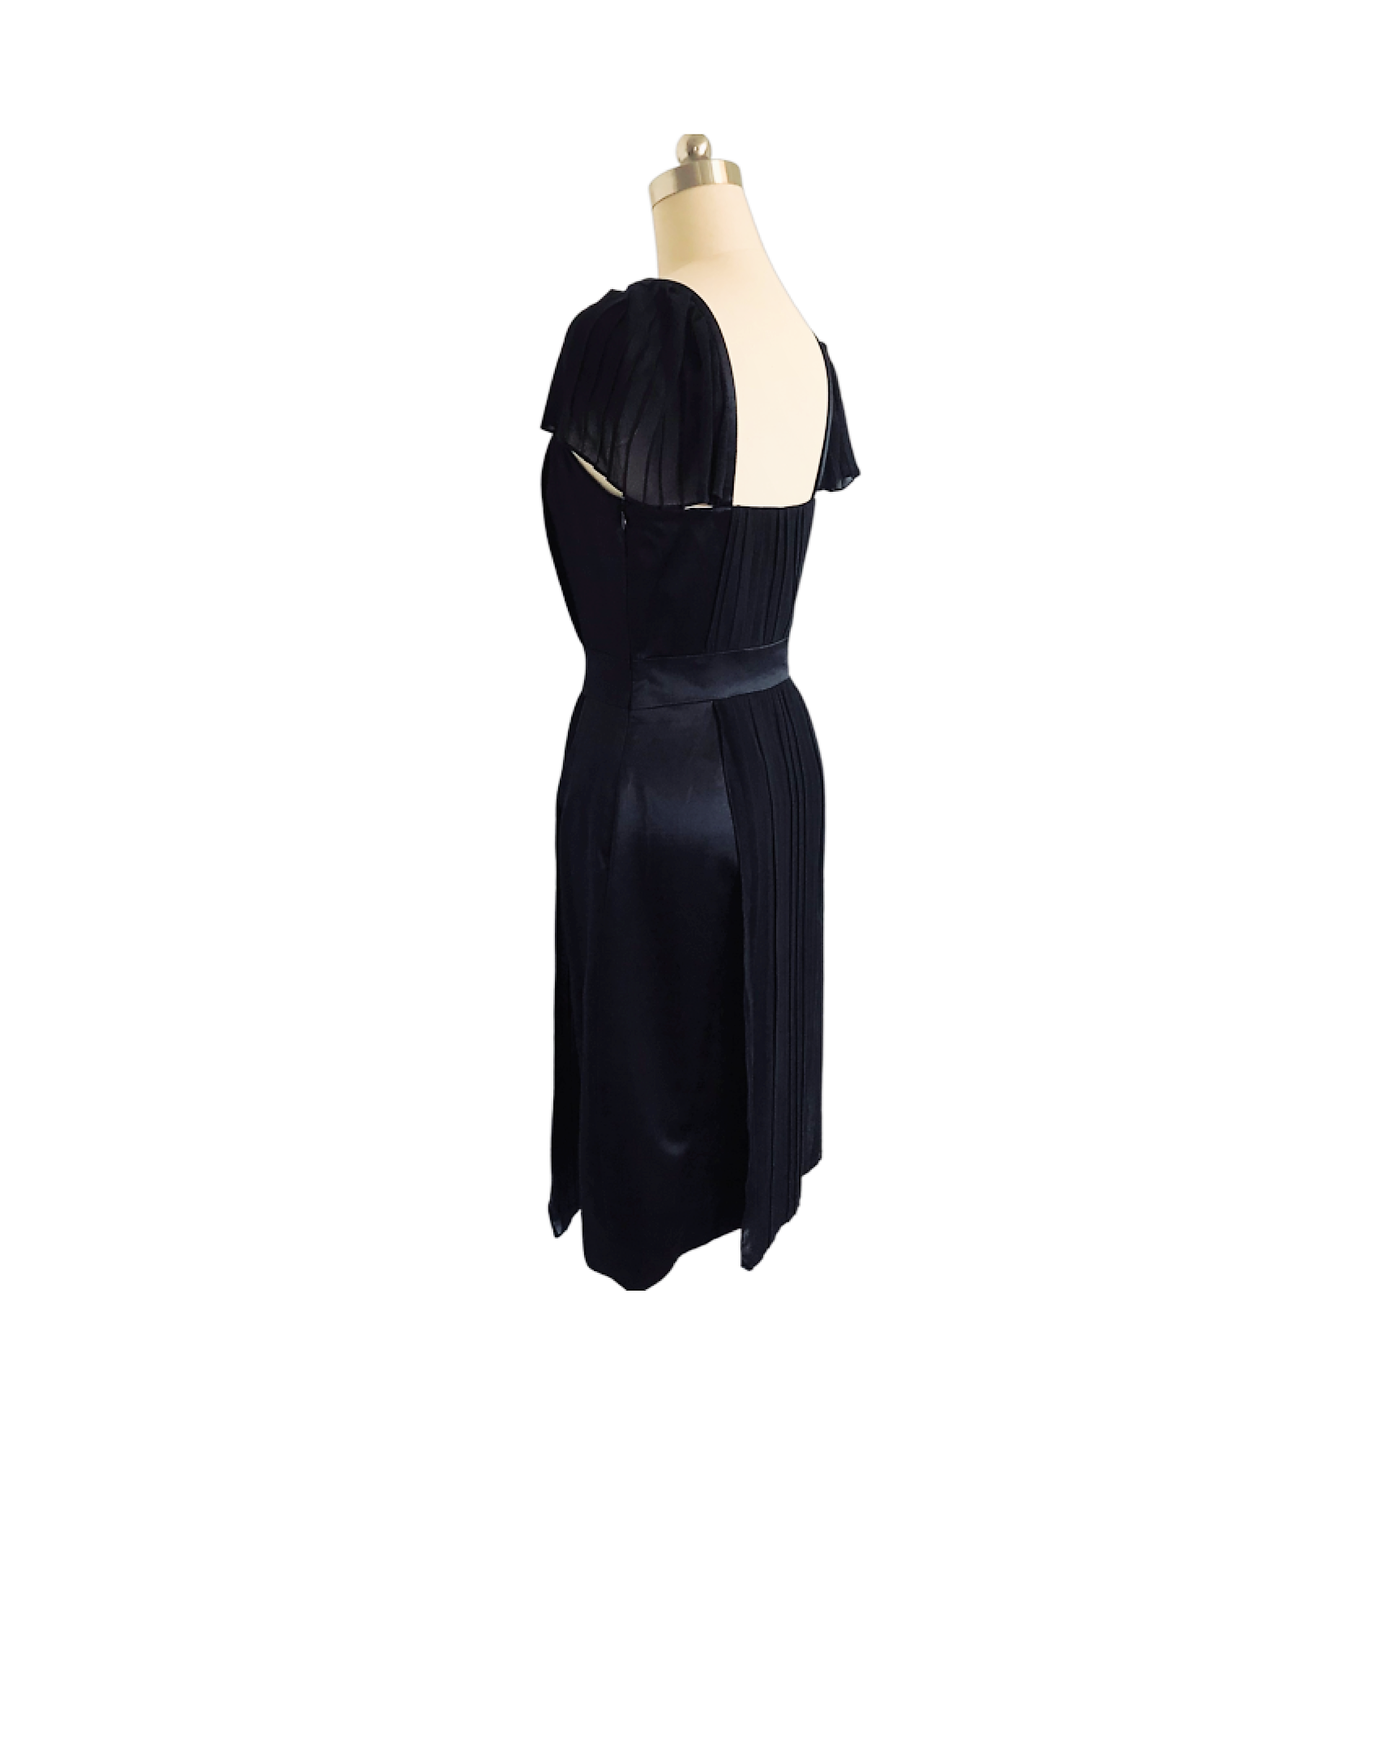 Black Pleated Cocktail Dress - (50%OFF)